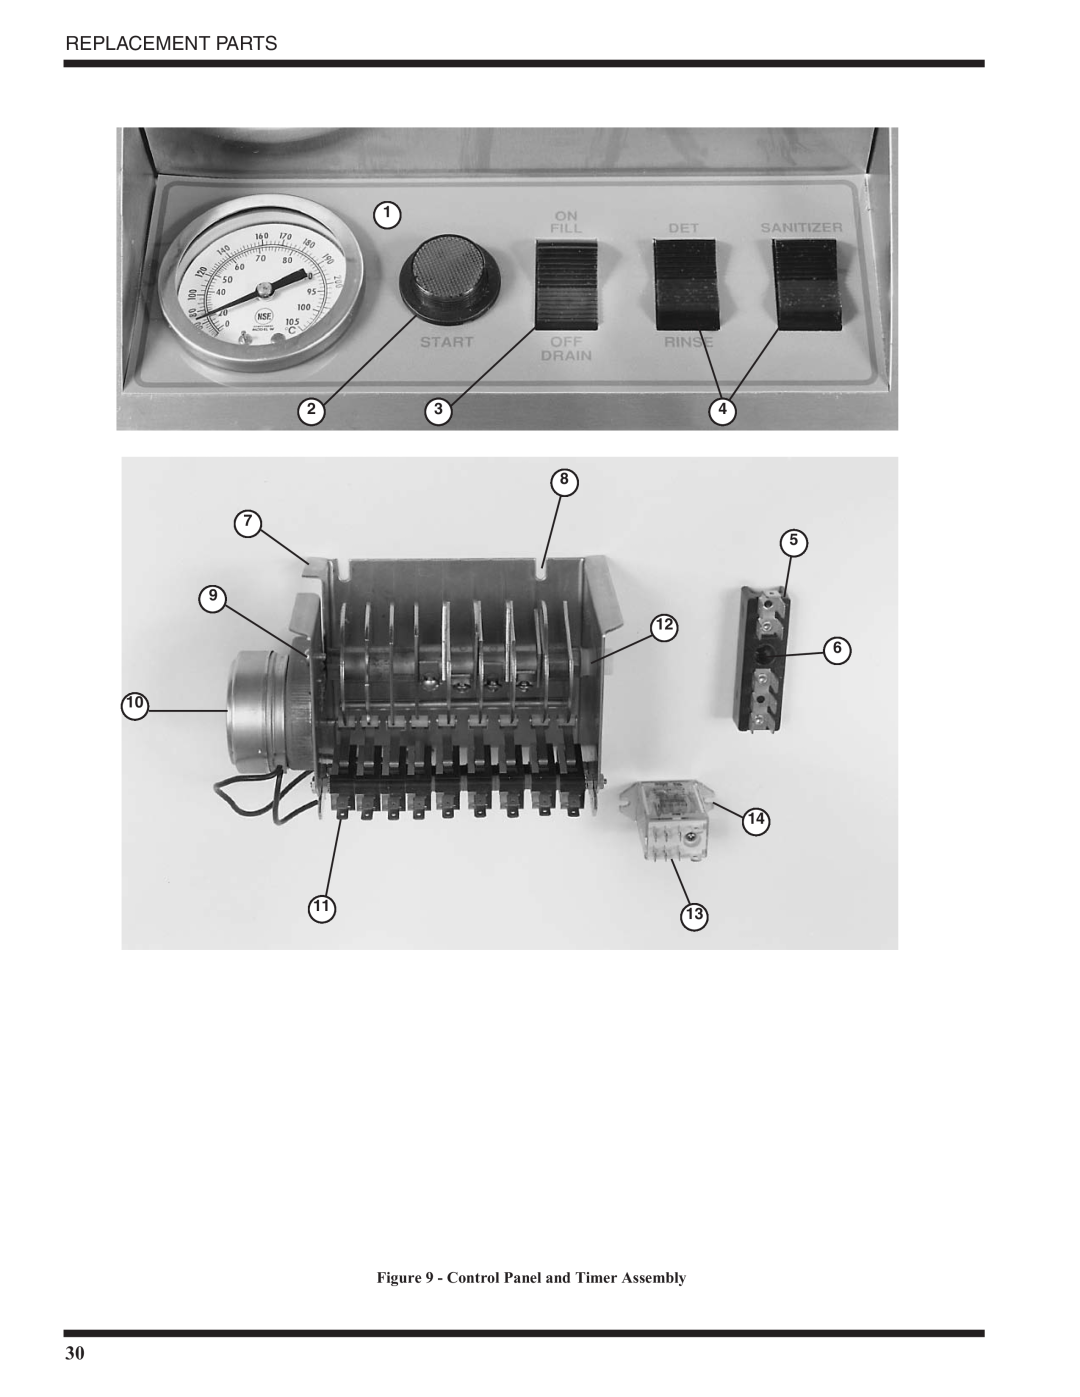 Moyer Diebel MD18-1, MD18-2 technical manual Replacement Parts, Control Panel and Timer Assembly 